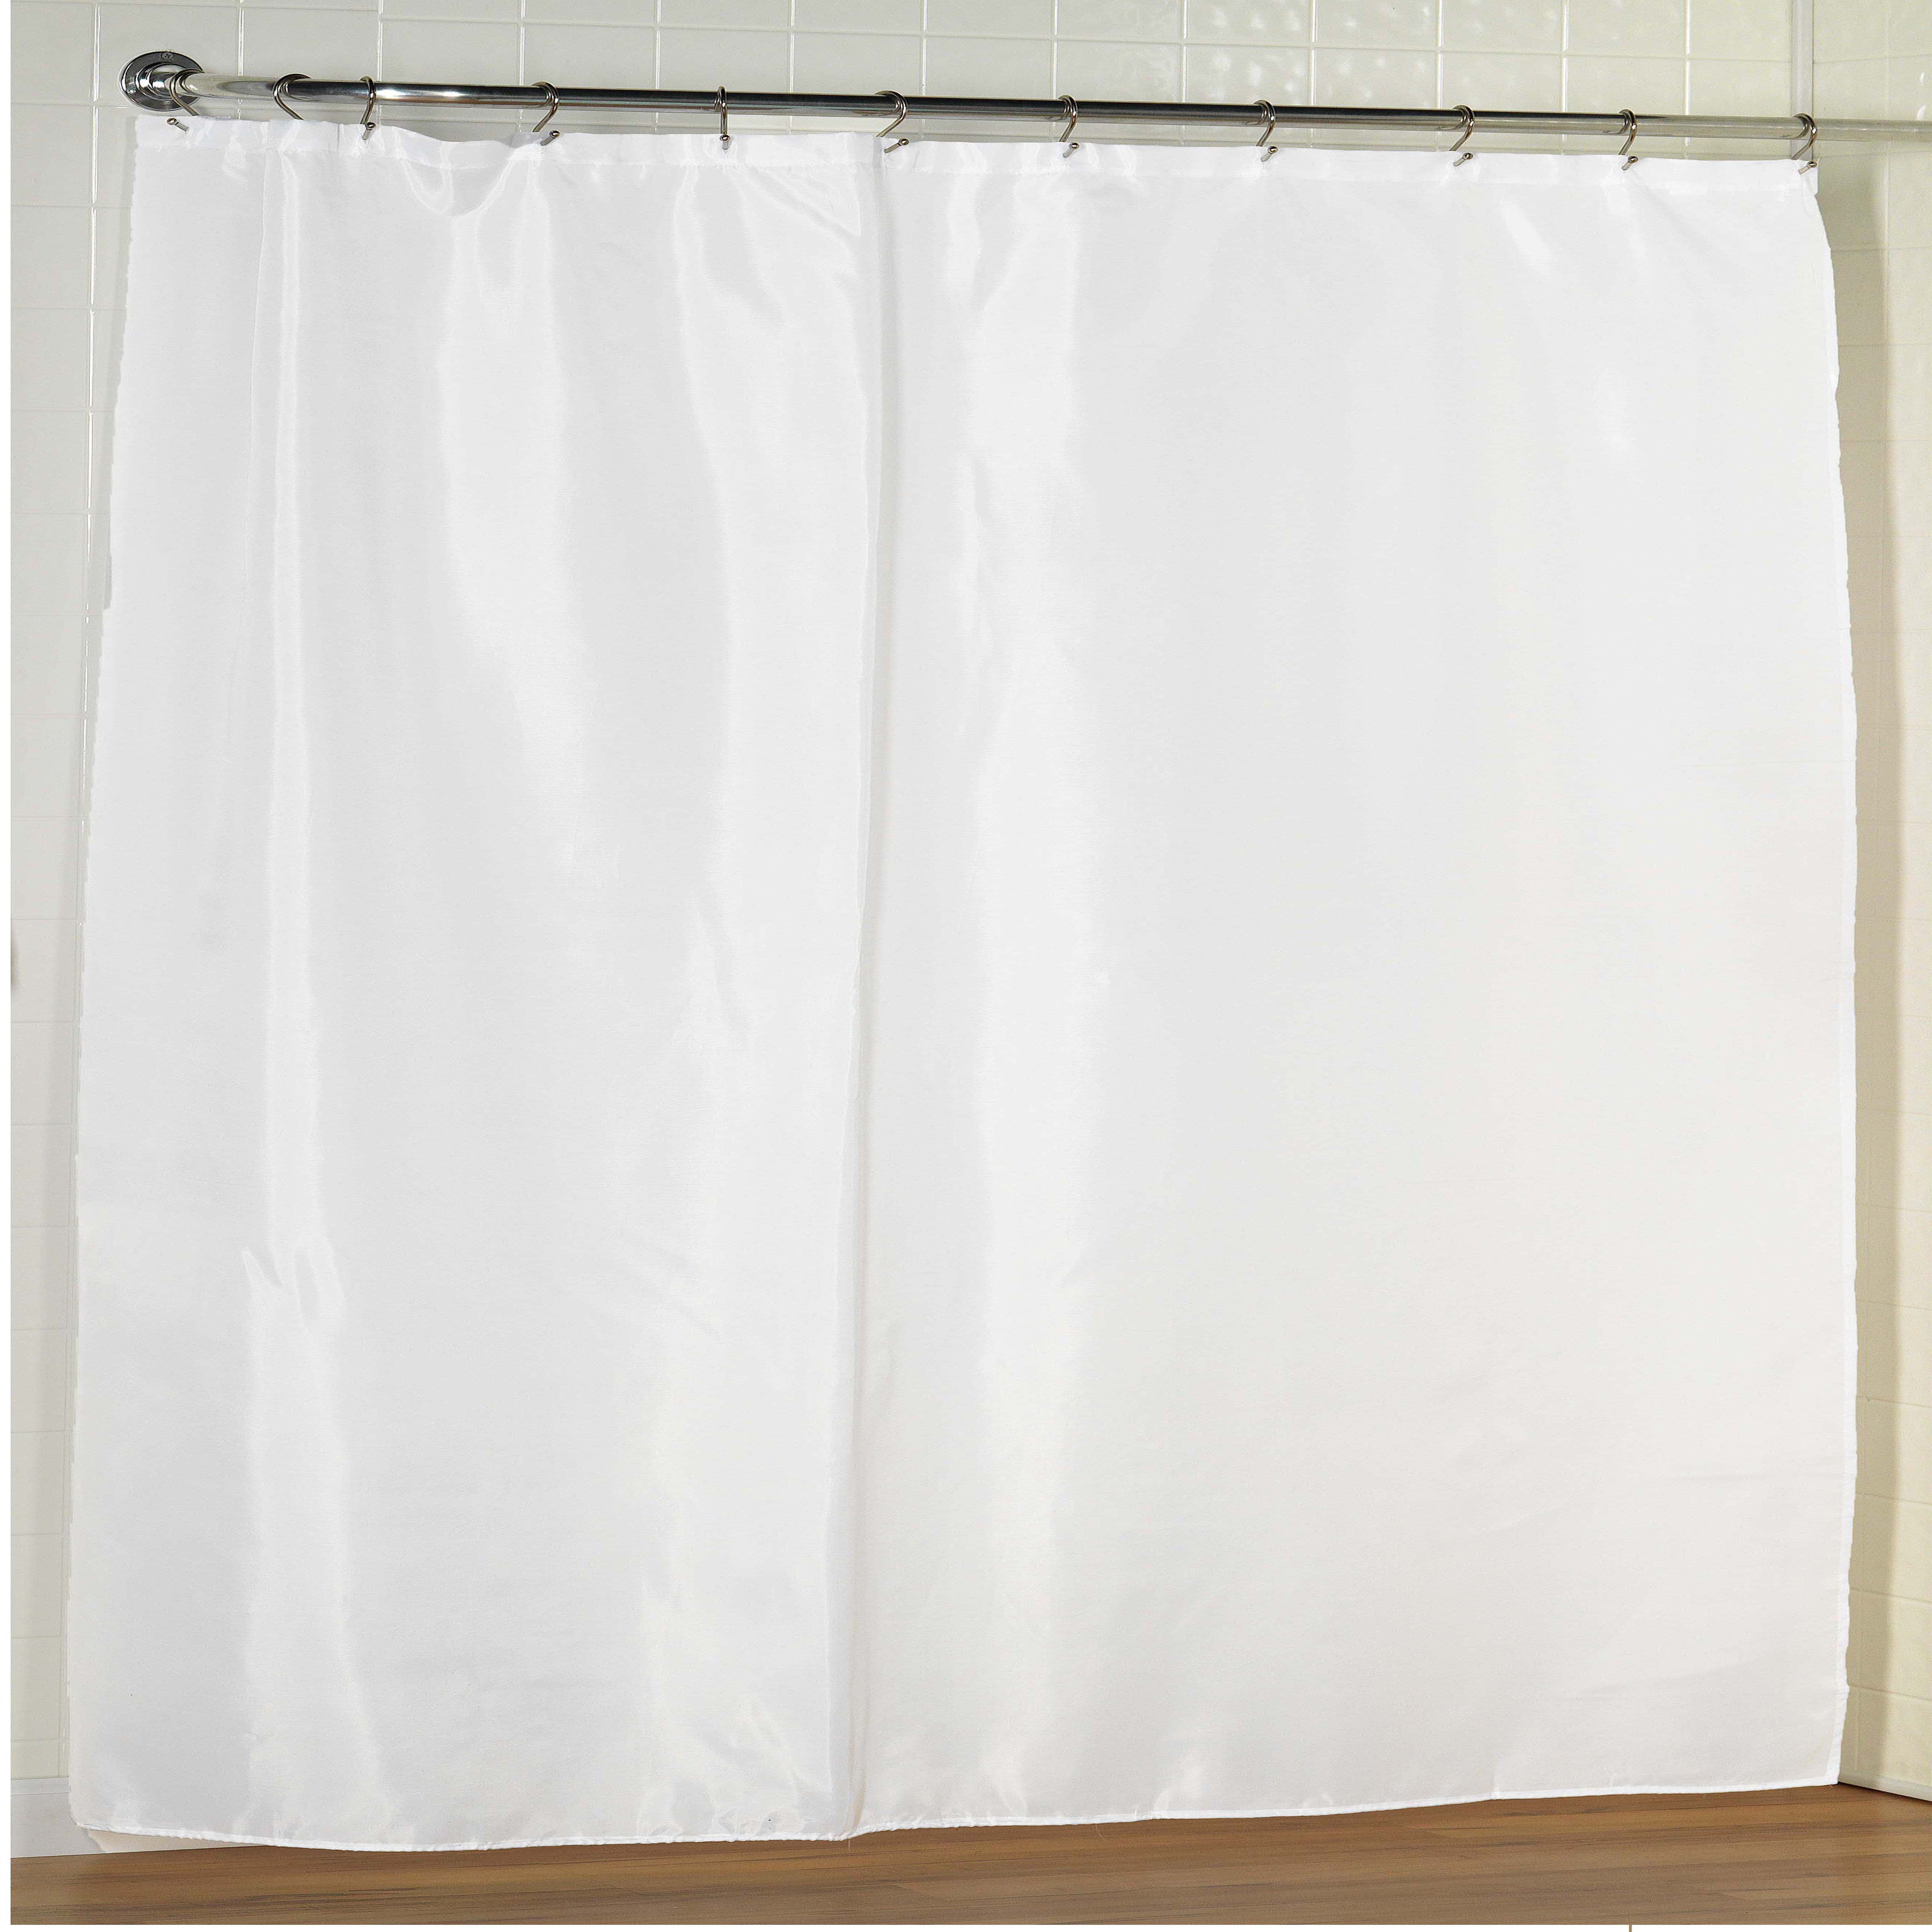 White Extra Wide Fabric Shower Curtain, What Shower Curtain Material Does Not Need A Liner